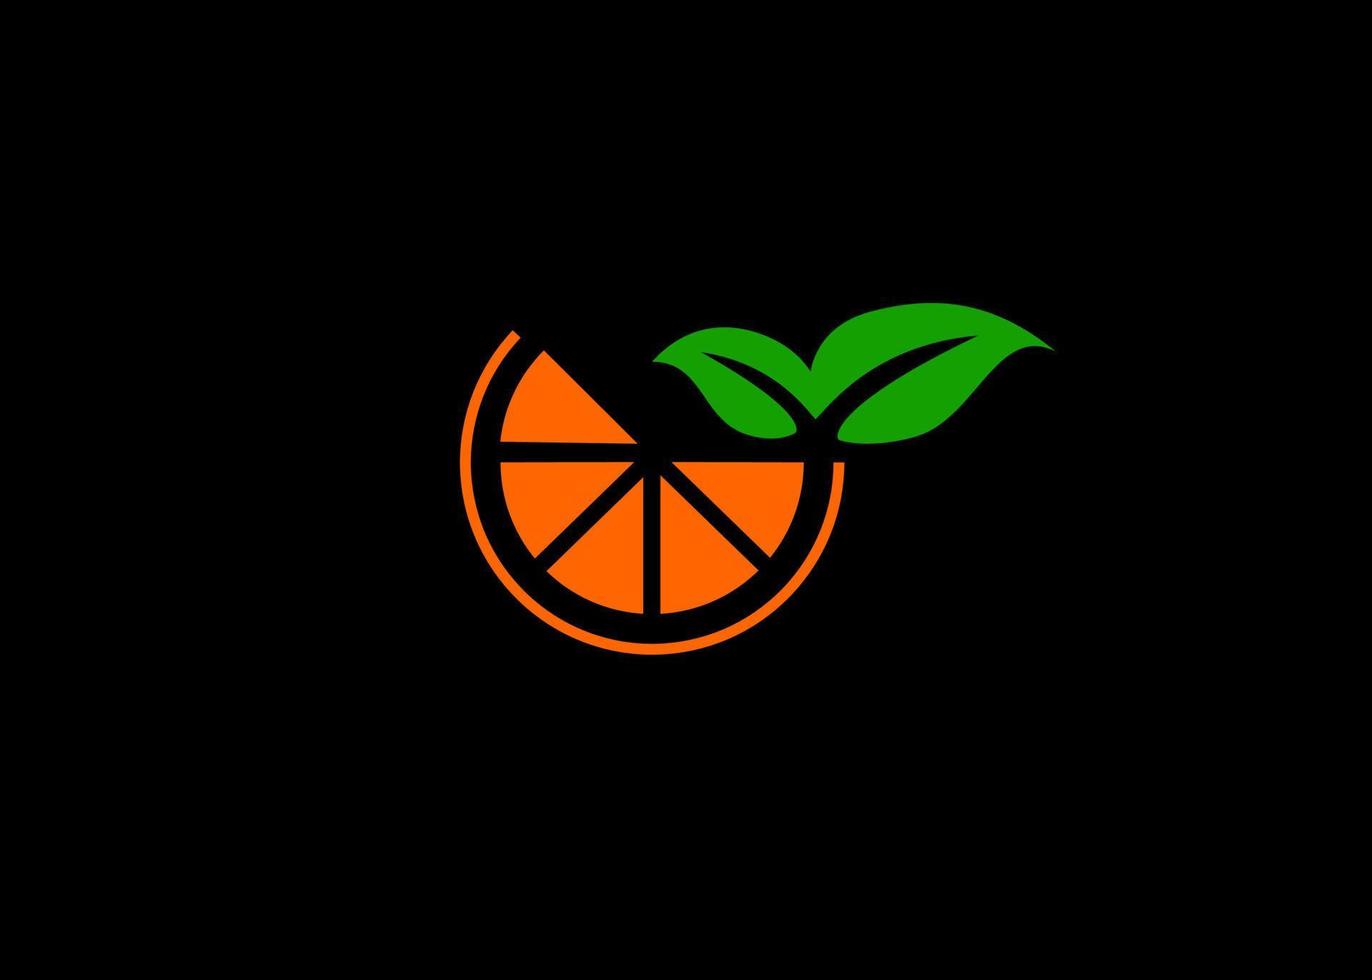 simple orange fruit with leaves logo, its good for your juice, cafe, or drink company or business vector